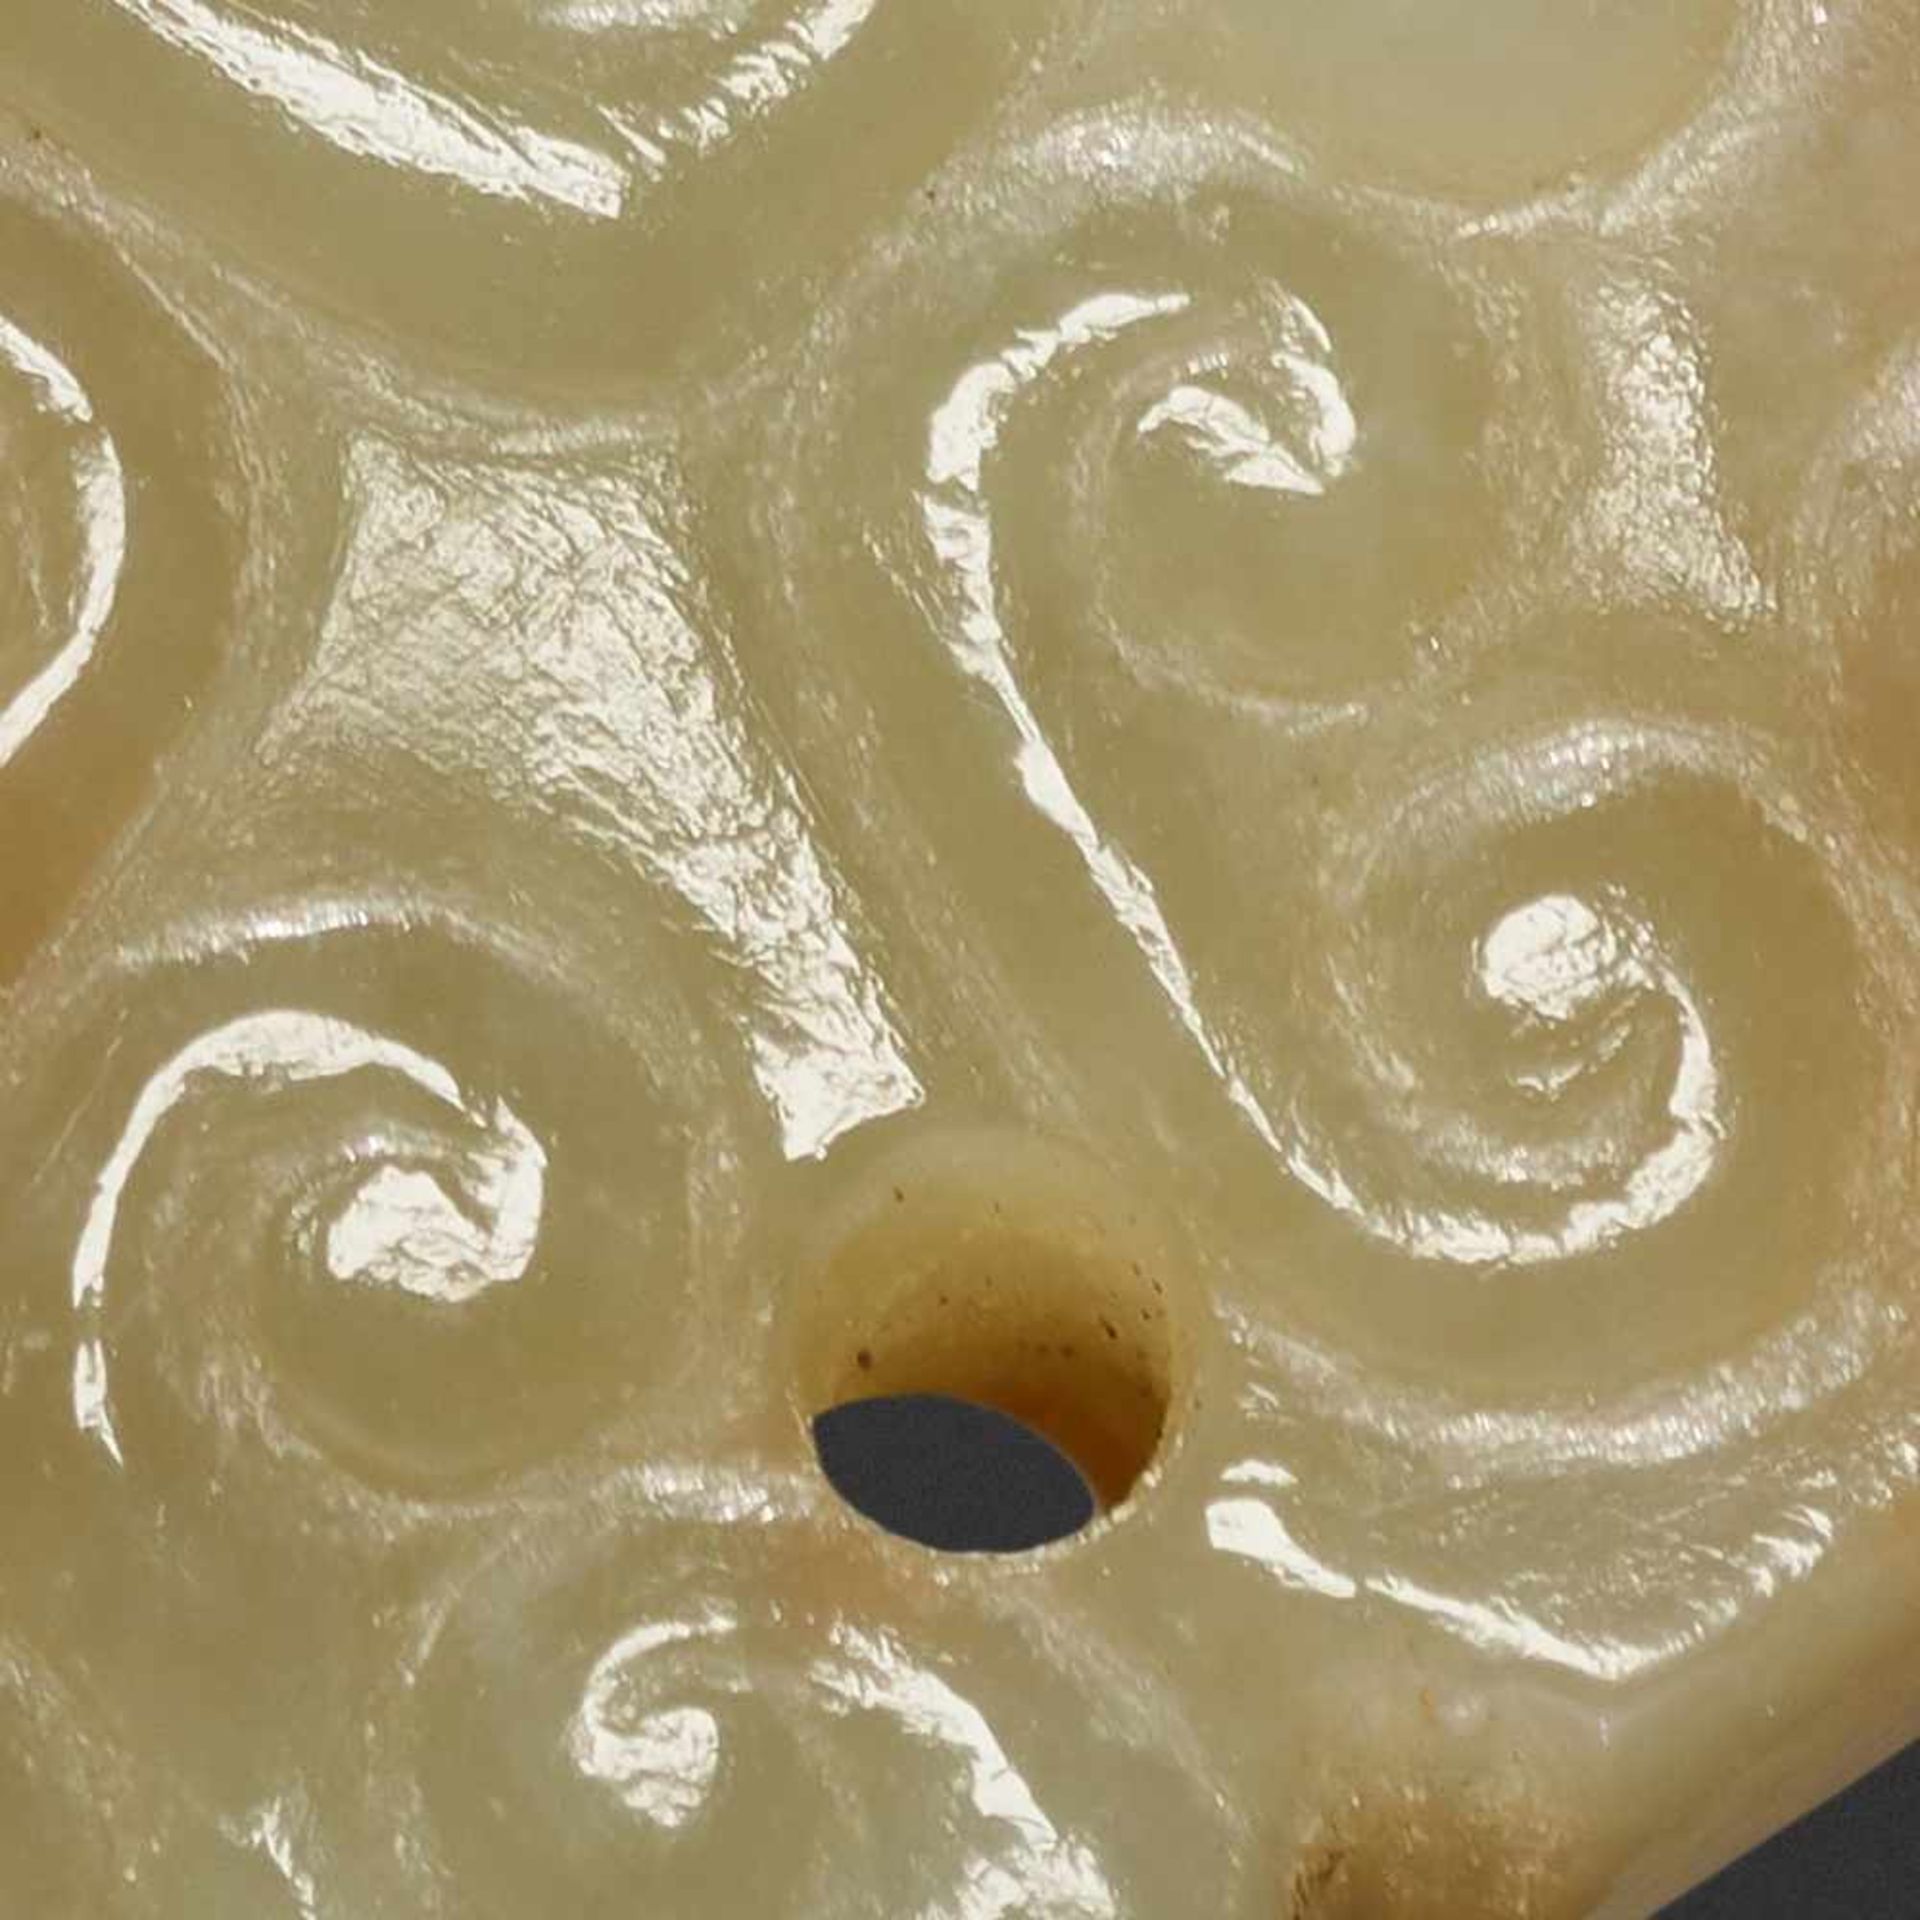 A FINE TINY DRAGON-SHAPED PENDANT IN HIGHLY POLISHED LIGHT GREEN JADE Jade. China, Eastern Zhou, - Image 7 of 8